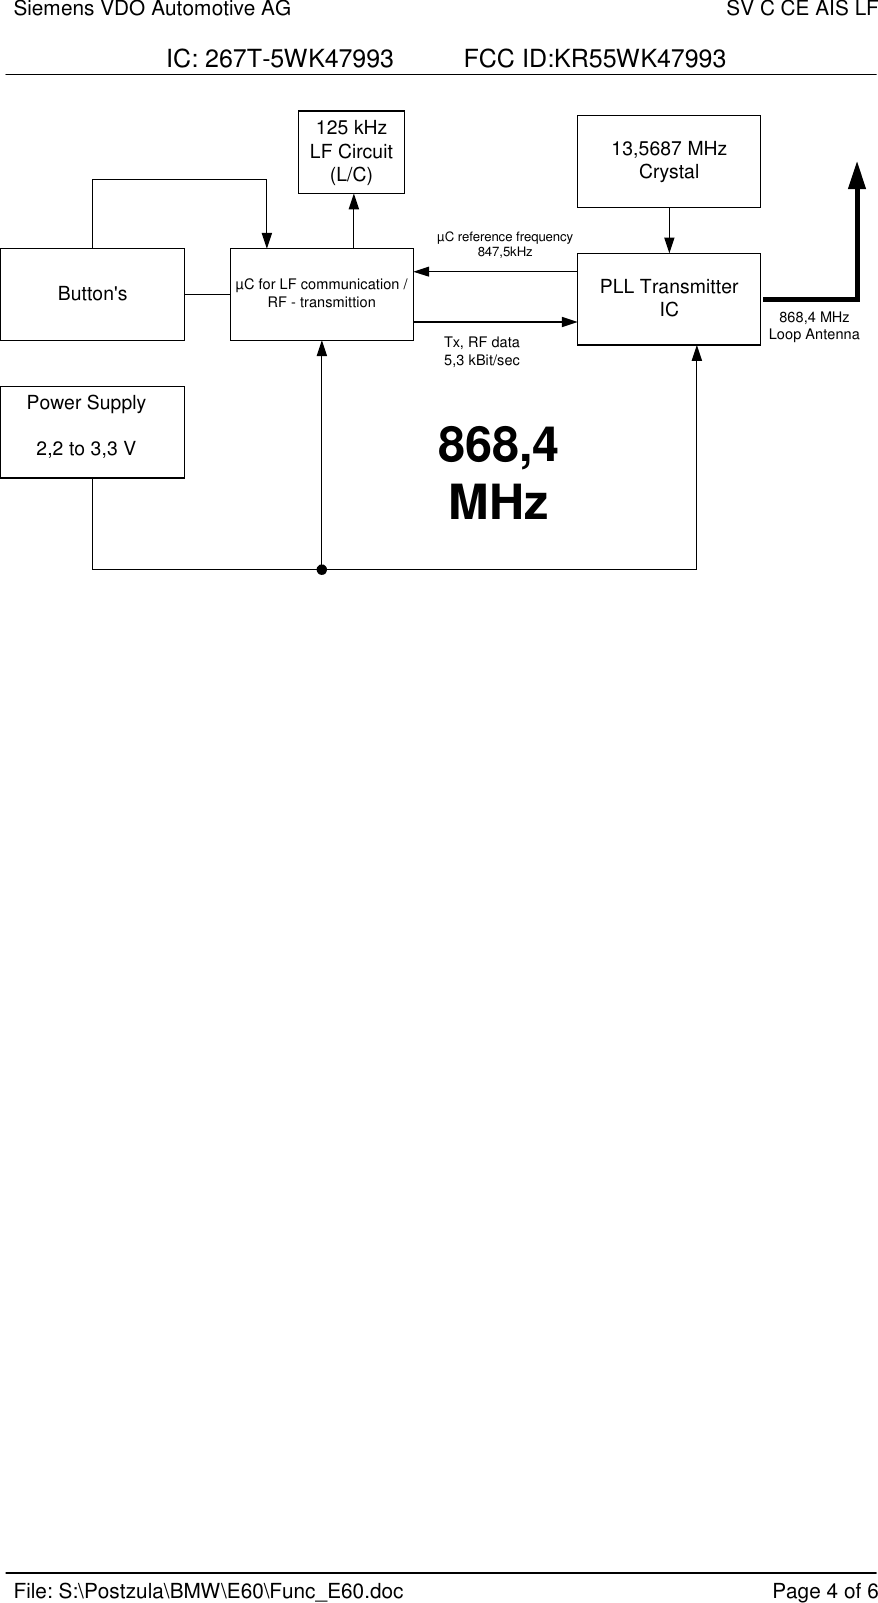 Siemens VDO Automotive AG SV C CE AIS LFIC: 267T-5WK47993          FCC ID:KR55WK47993File: S:\Postzula\BMW\E60\Func_E60.doc Page 4 of 6Button&apos;s PLL TransmitterIC13,5687 MHzCrystal125 kHzLF Circuit(L/C)µC for LF communication /RF - transmittionPower Supply2,2 to 3,3 VµC reference frequency847,5kHzTx, RF data5,3 kBit/sec868,4MHz868,4 MHzLoop Antenna